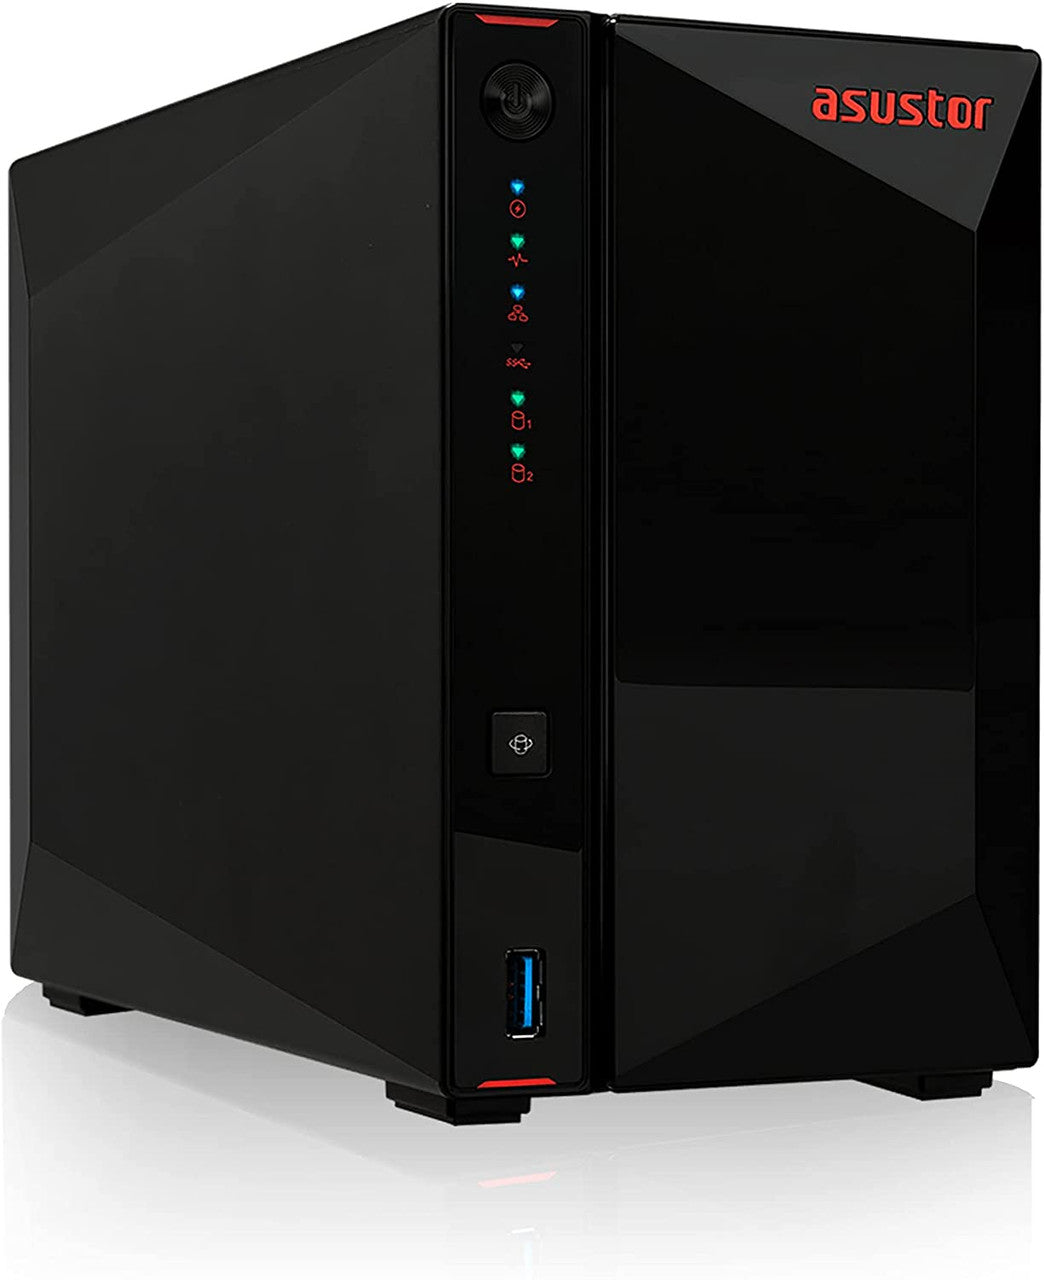 Asustor AS5202T 2-Bay Nimbustor 2 NAS with 8GB RAM and 28TB (2 x 14TB) Western Digital RED PRO Drives Fully Assembled and Tested